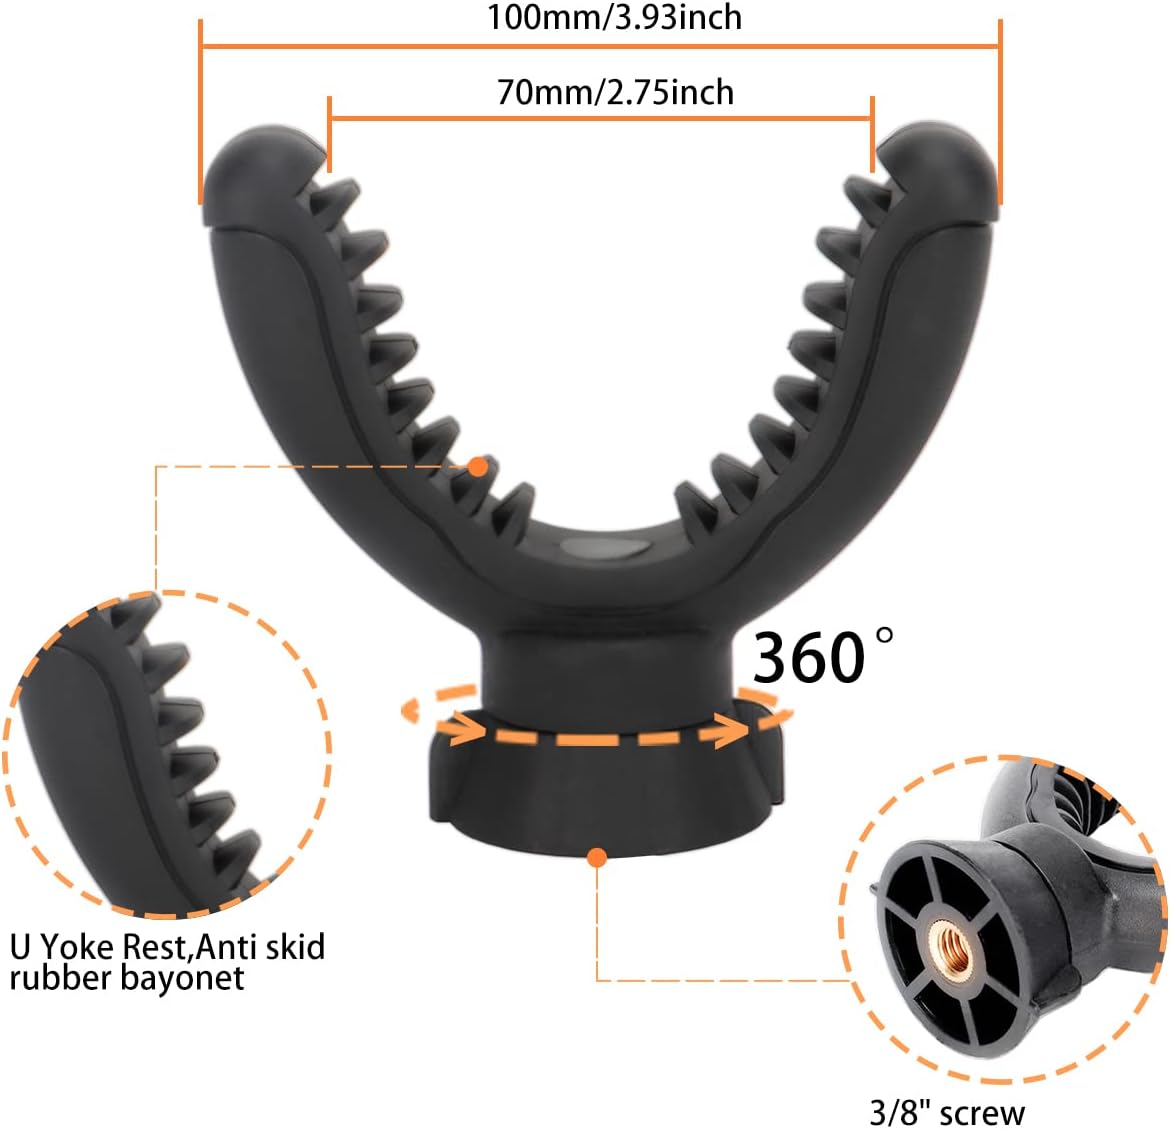 Fooletu U Yoke Rest Mount Attachment Removable 360° Rotate U Yoke Rest with 3/8" to 1/4" Screws Adapter Holder Rifle Shotgun Shooting Rest for Shooting Stick Tripod Stand